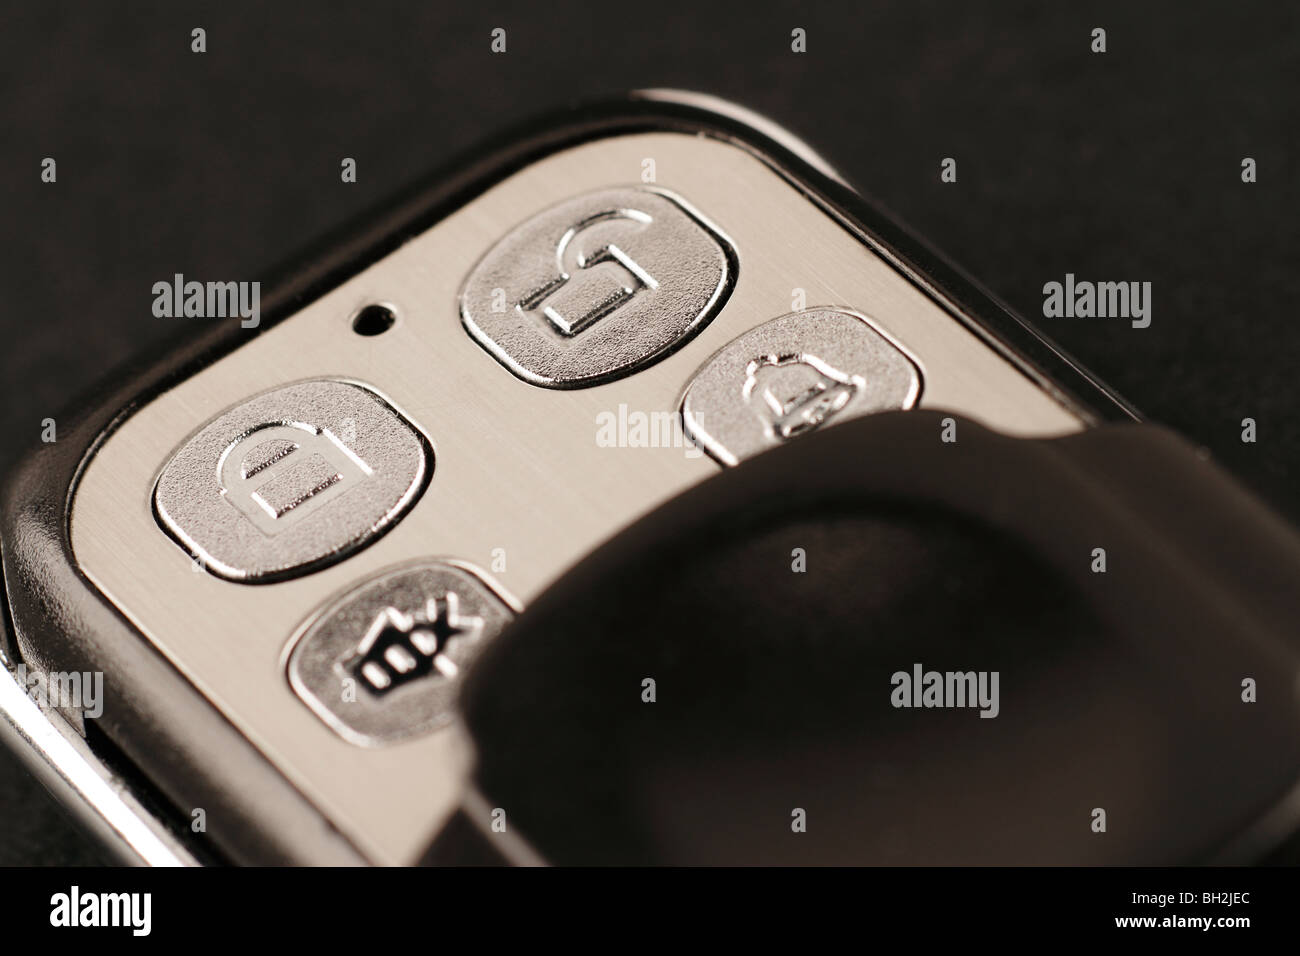 Close-up of a car alarm remote control on a black background Stock Photo